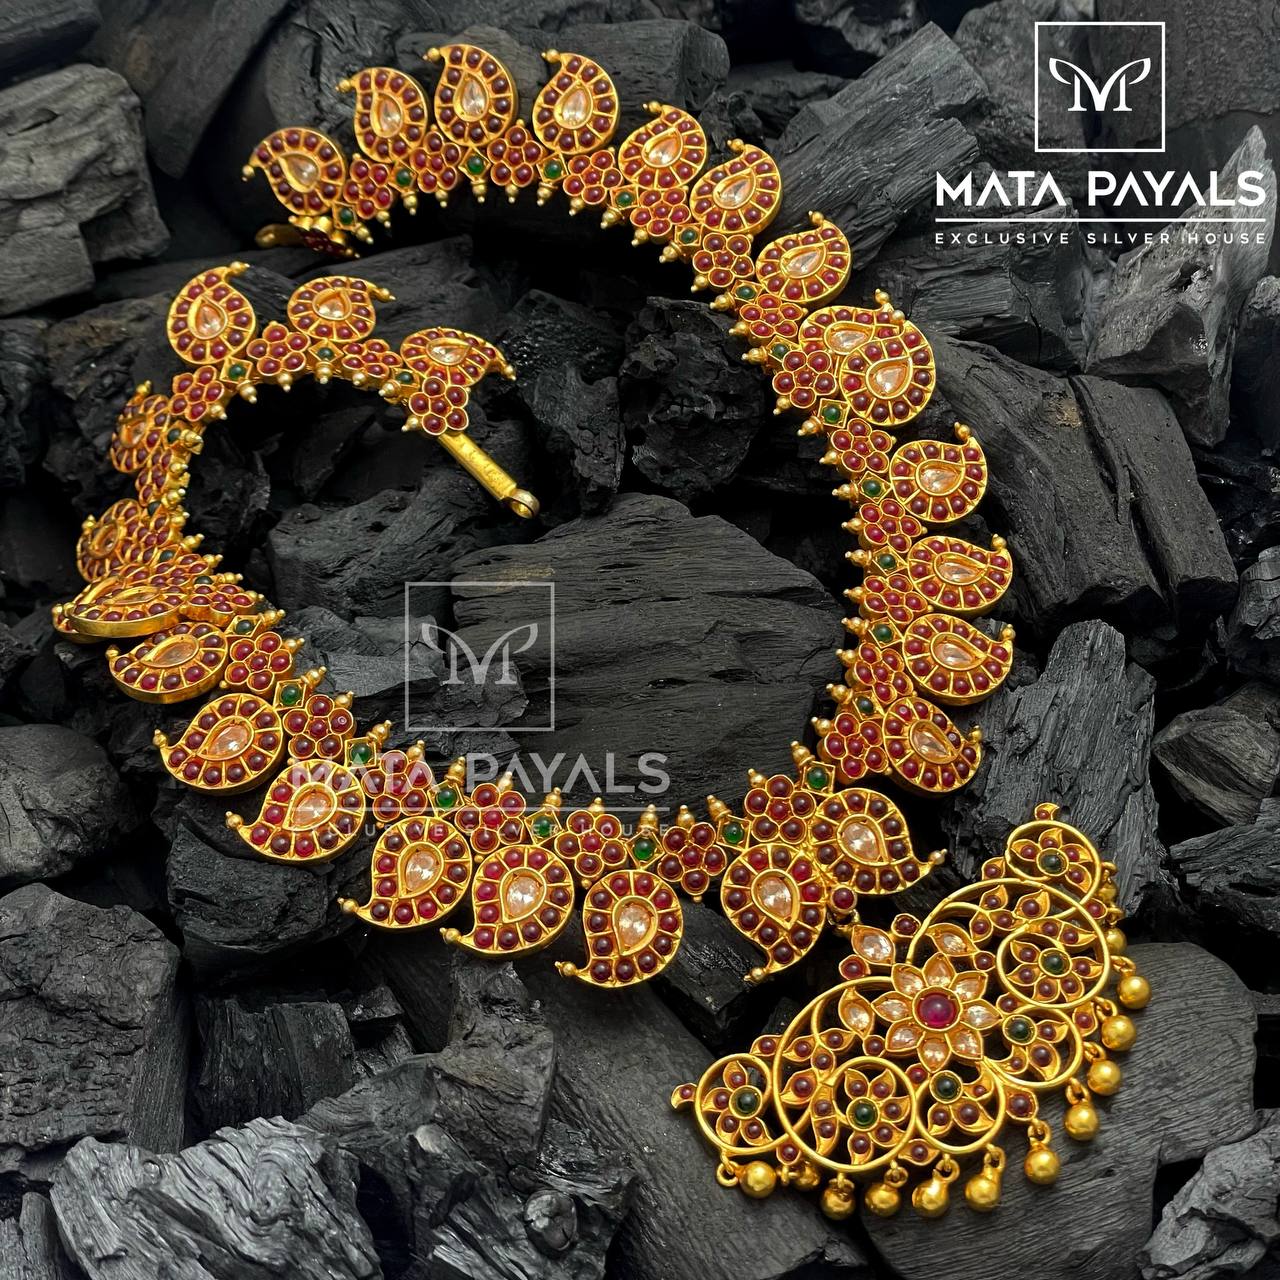 Traditional Gold Plated Necklace